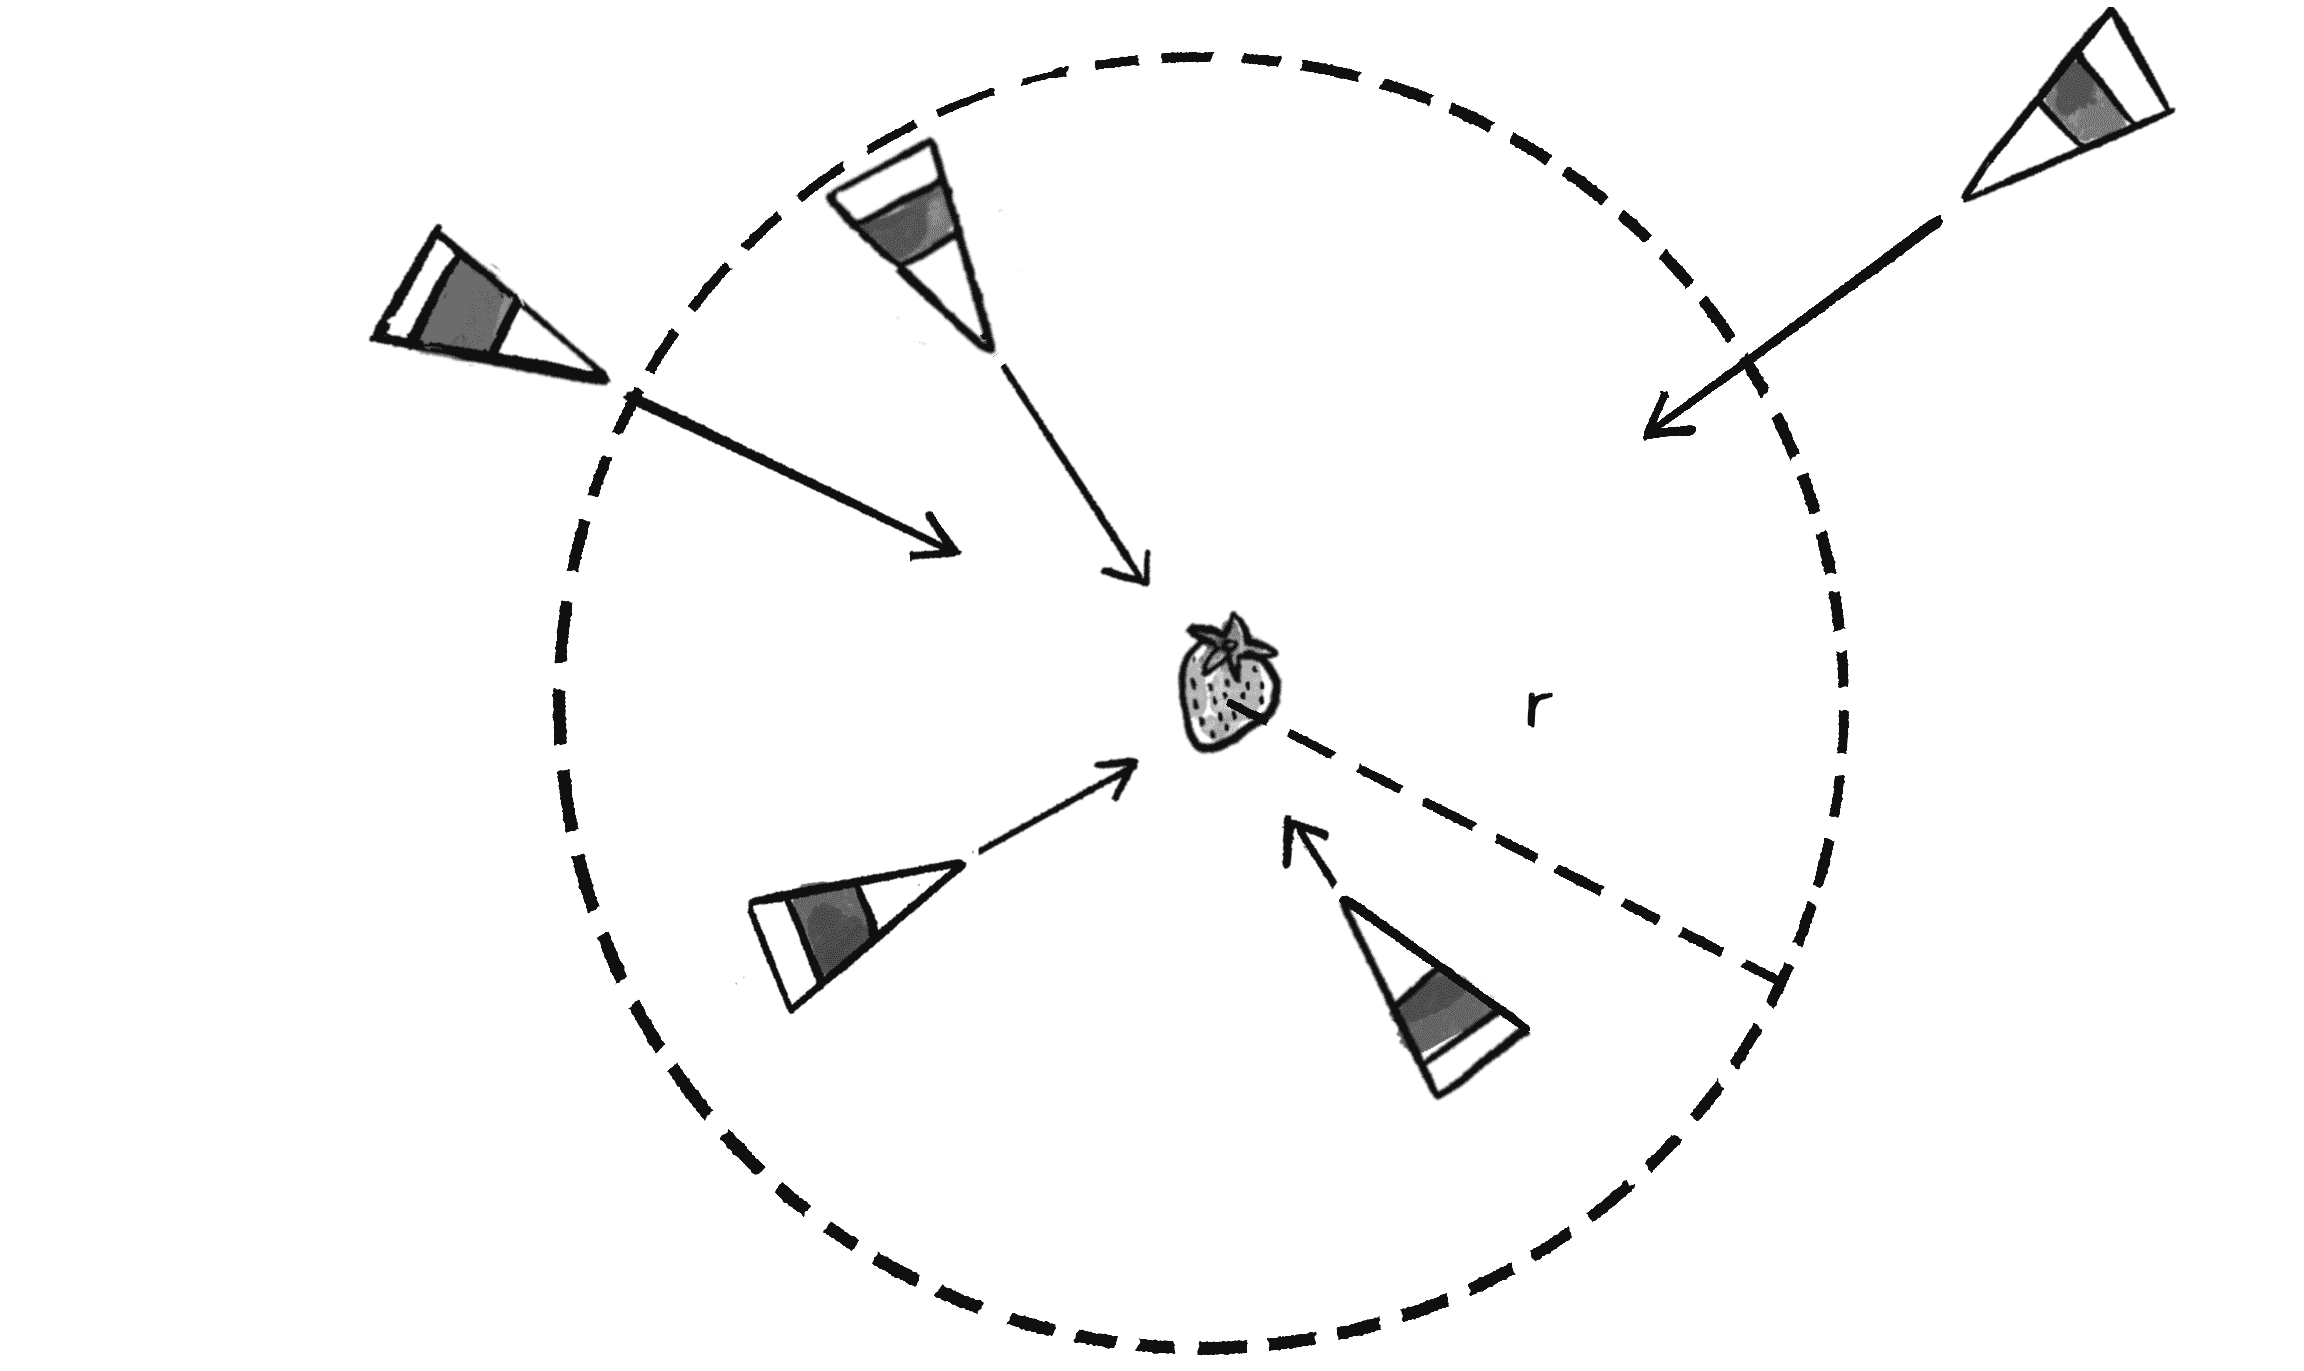 Figure 5.9: Outside the circle, the magnitude of a vehicle’s desired velocity is set to the maximum speed. As vehicles enter the circle and approach the target, their desired velocity magnitude decreases.